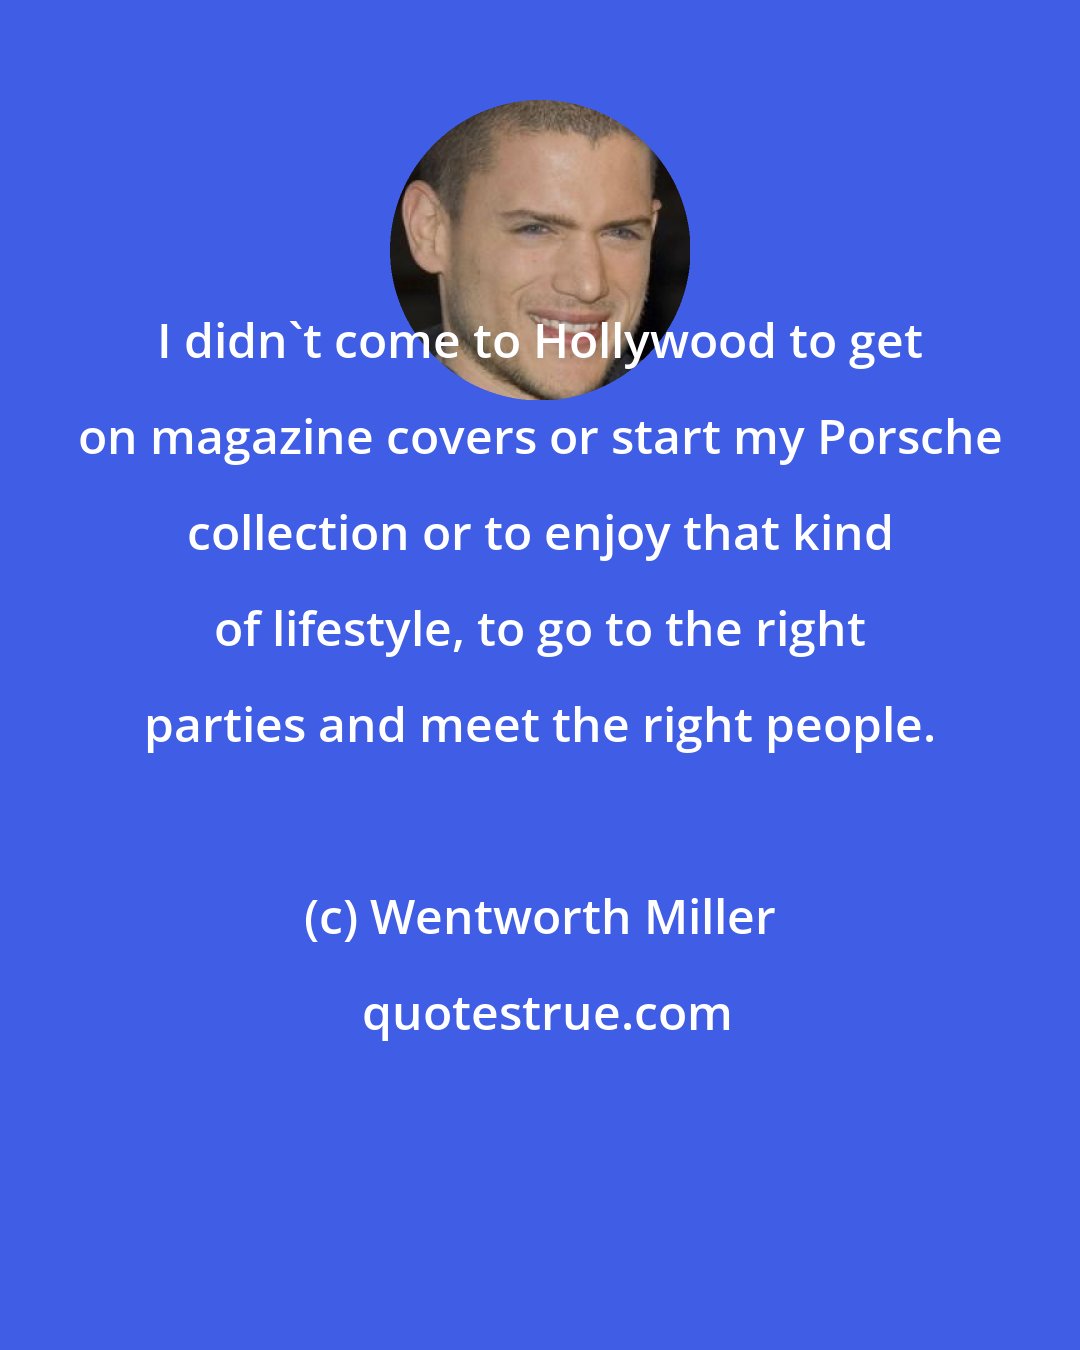 Wentworth Miller: I didn't come to Hollywood to get on magazine covers or start my Porsche collection or to enjoy that kind of lifestyle, to go to the right parties and meet the right people.